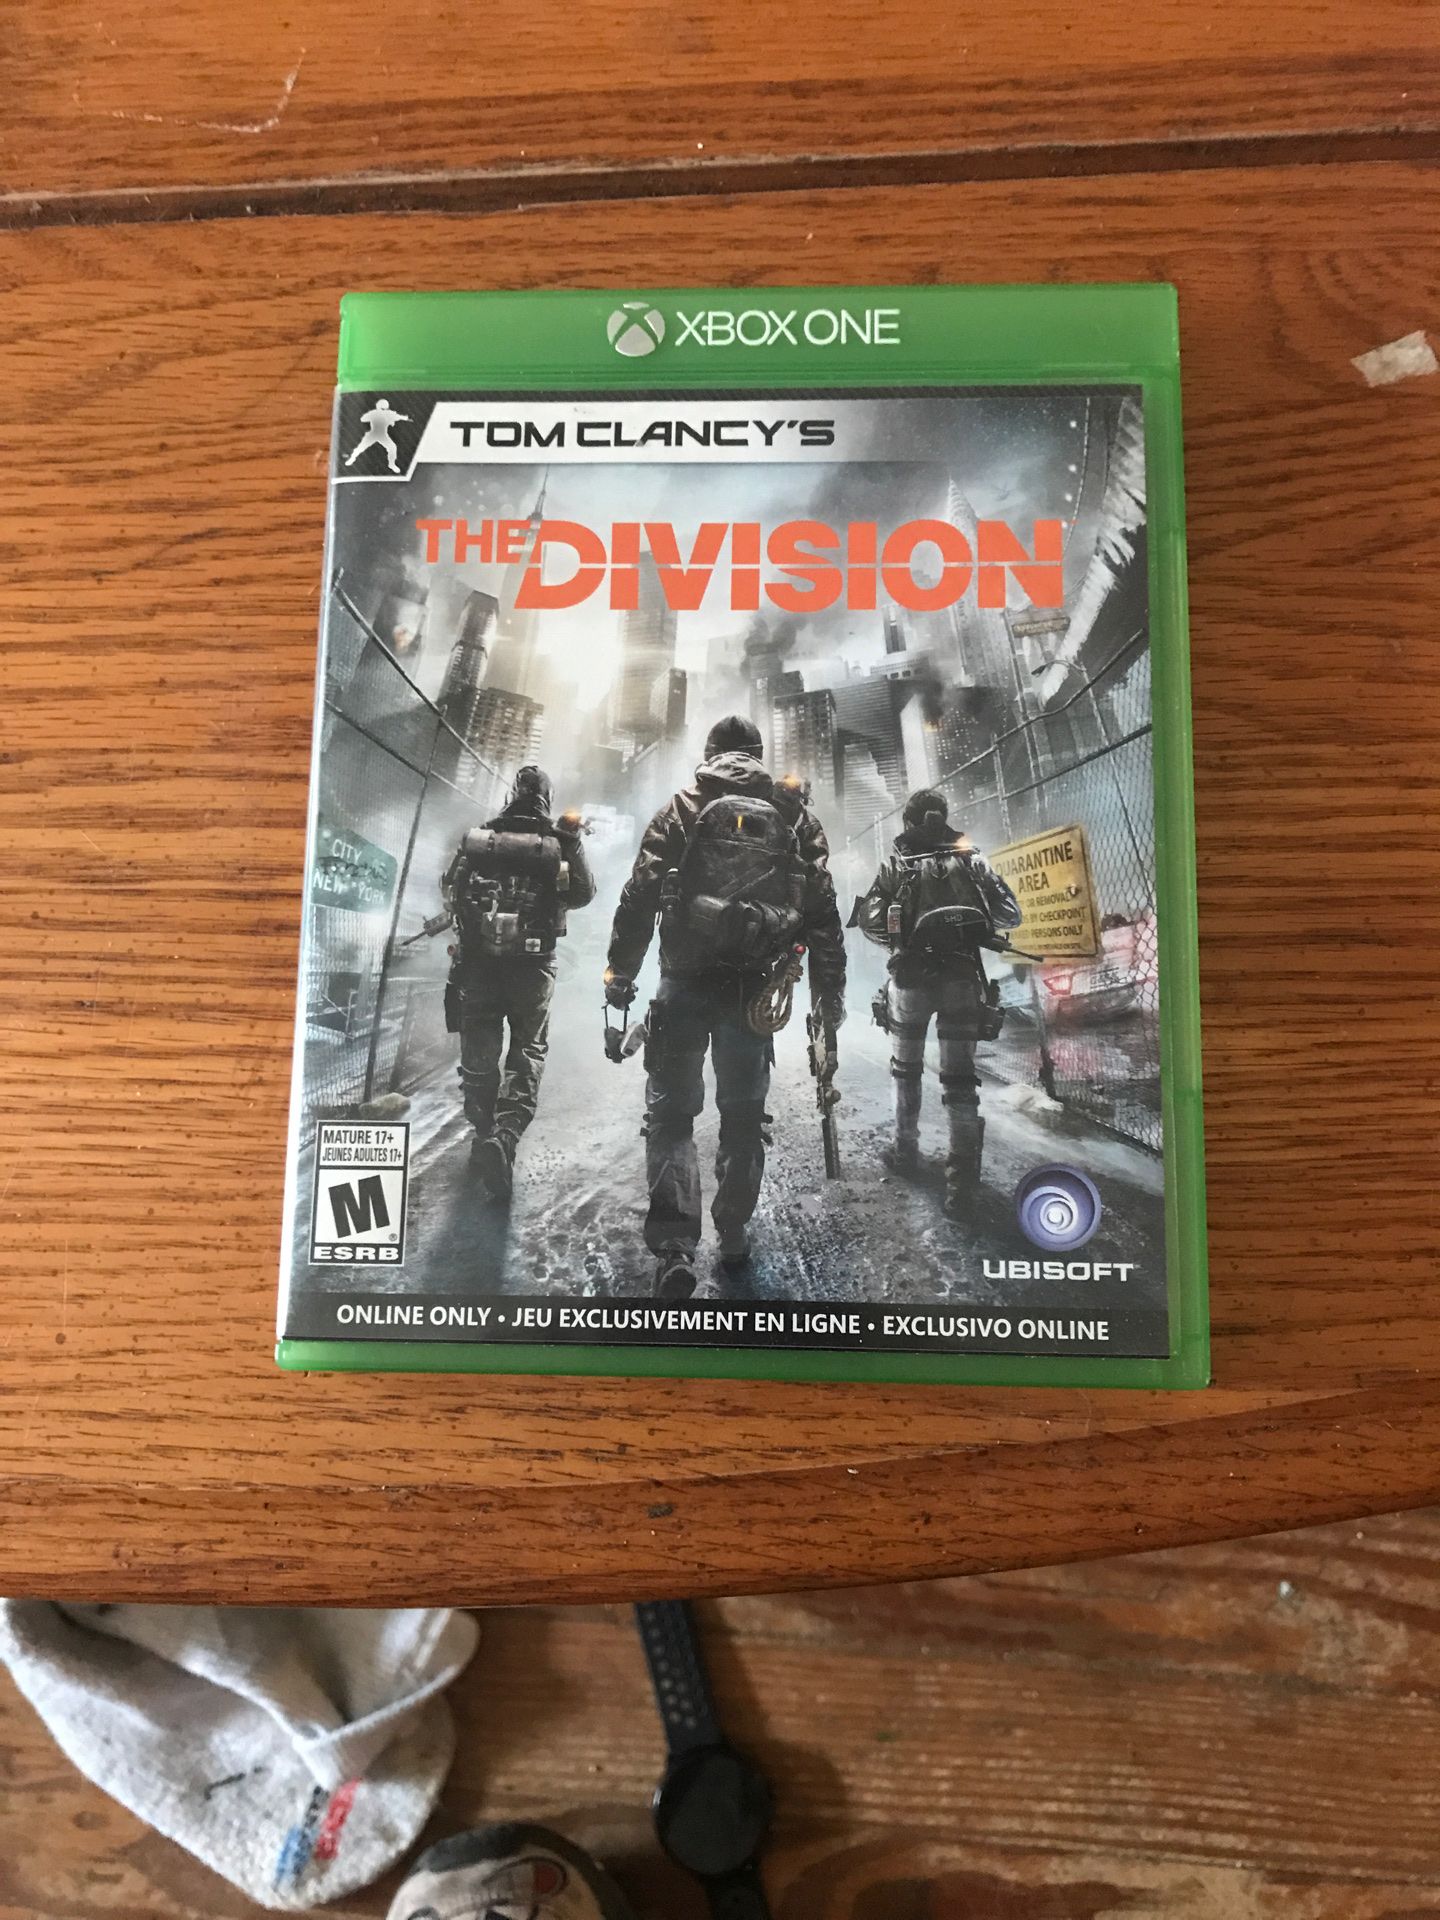 The DIVISION Xbox one game